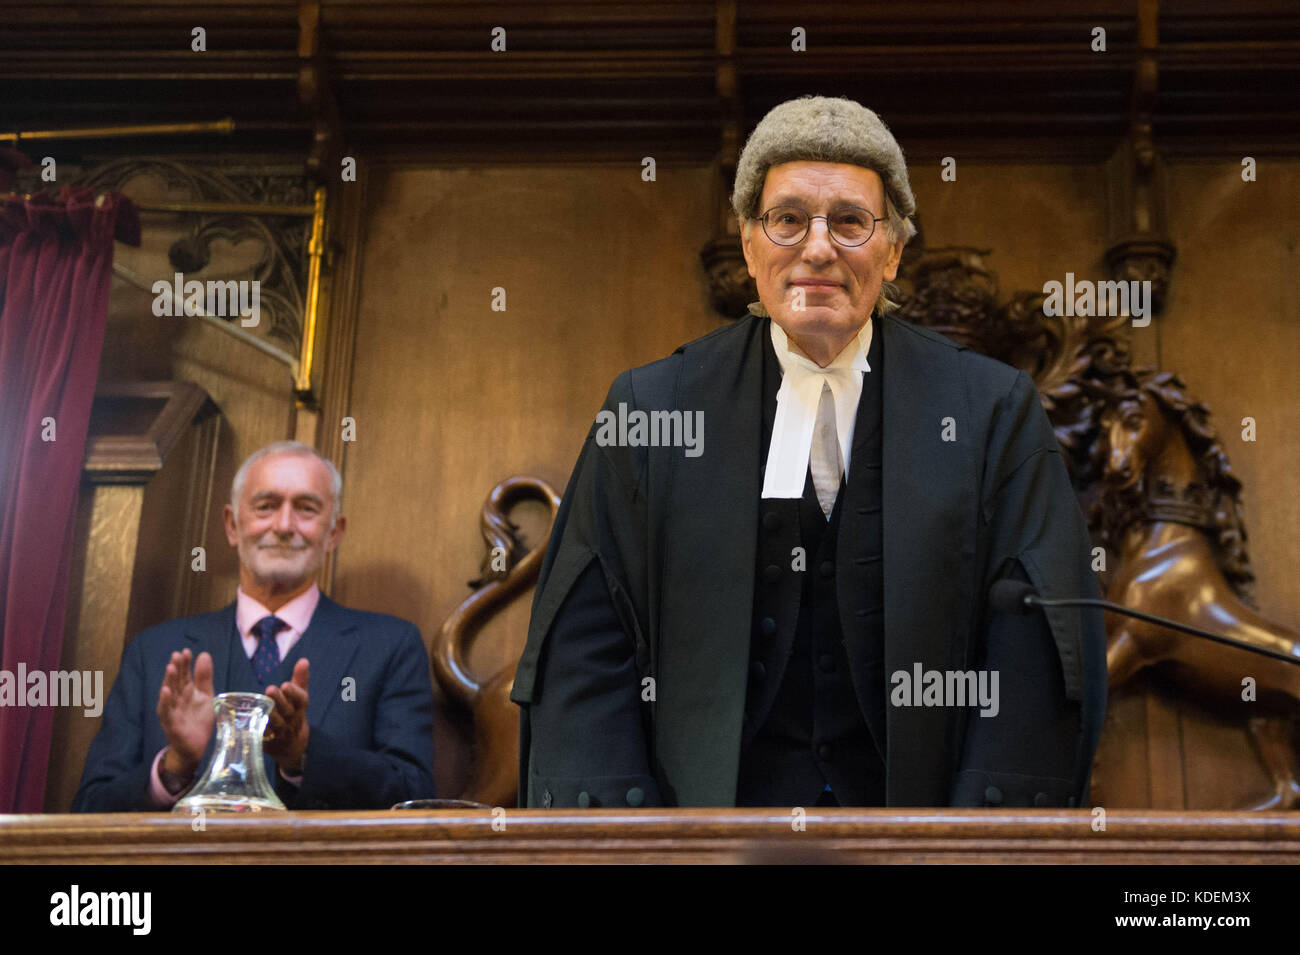 Mr Justice Bodey (right) one of the most senior family court judges in England and Wales, attends his valediction at the Royal Courts of Justice in London. Stock Photo